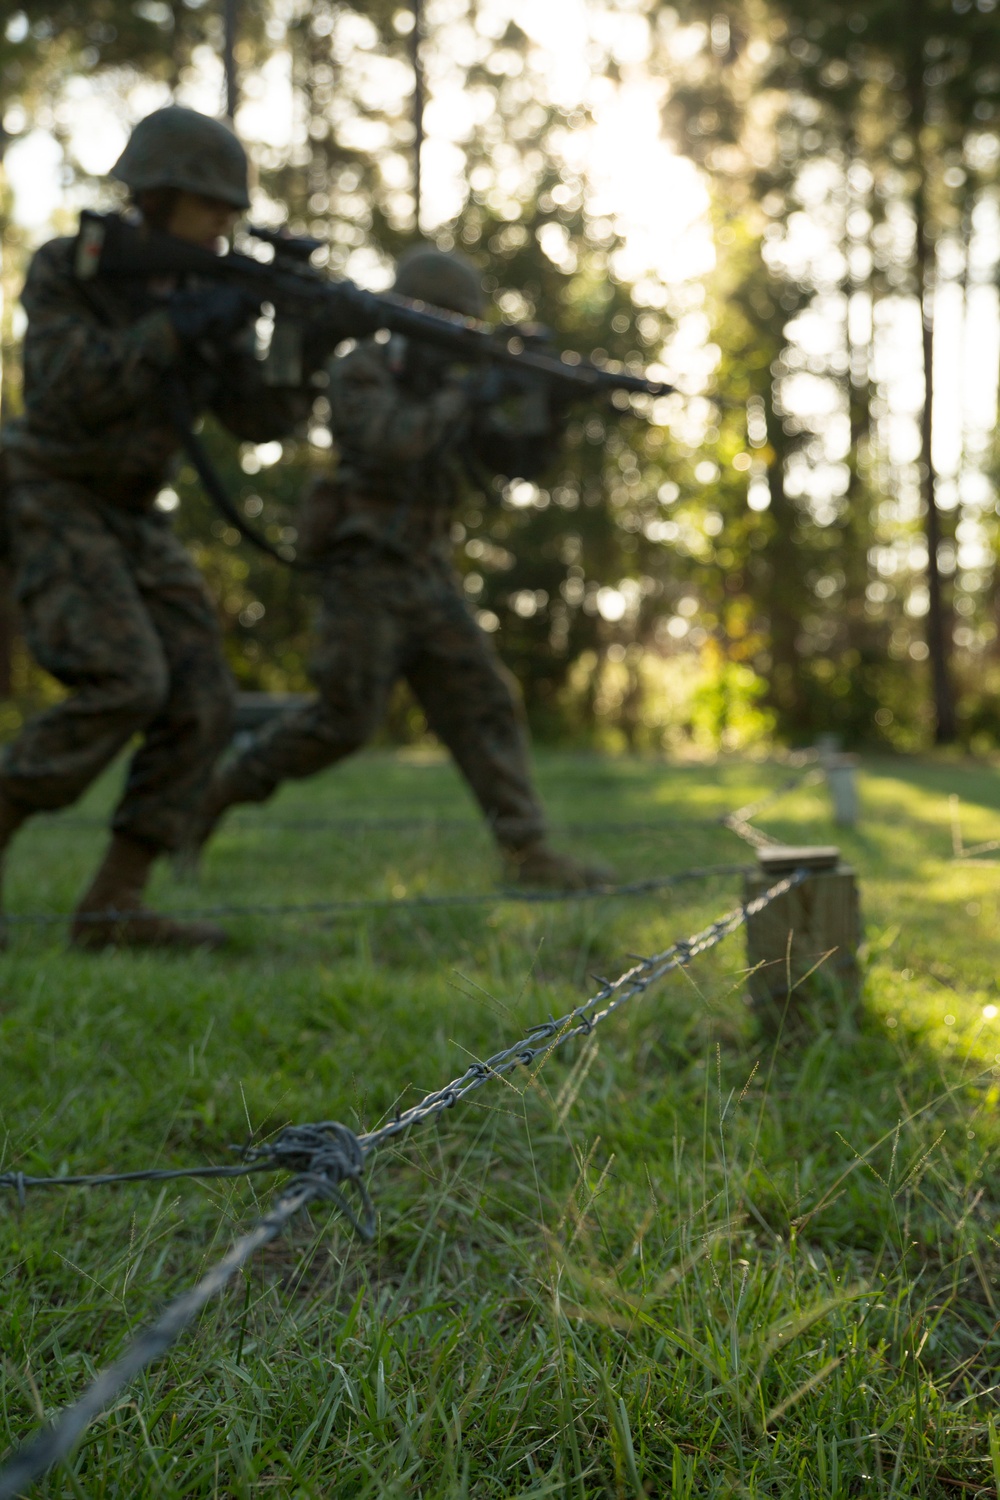 Photo Gallery: Marine recruits complete combat training course on Parris Island